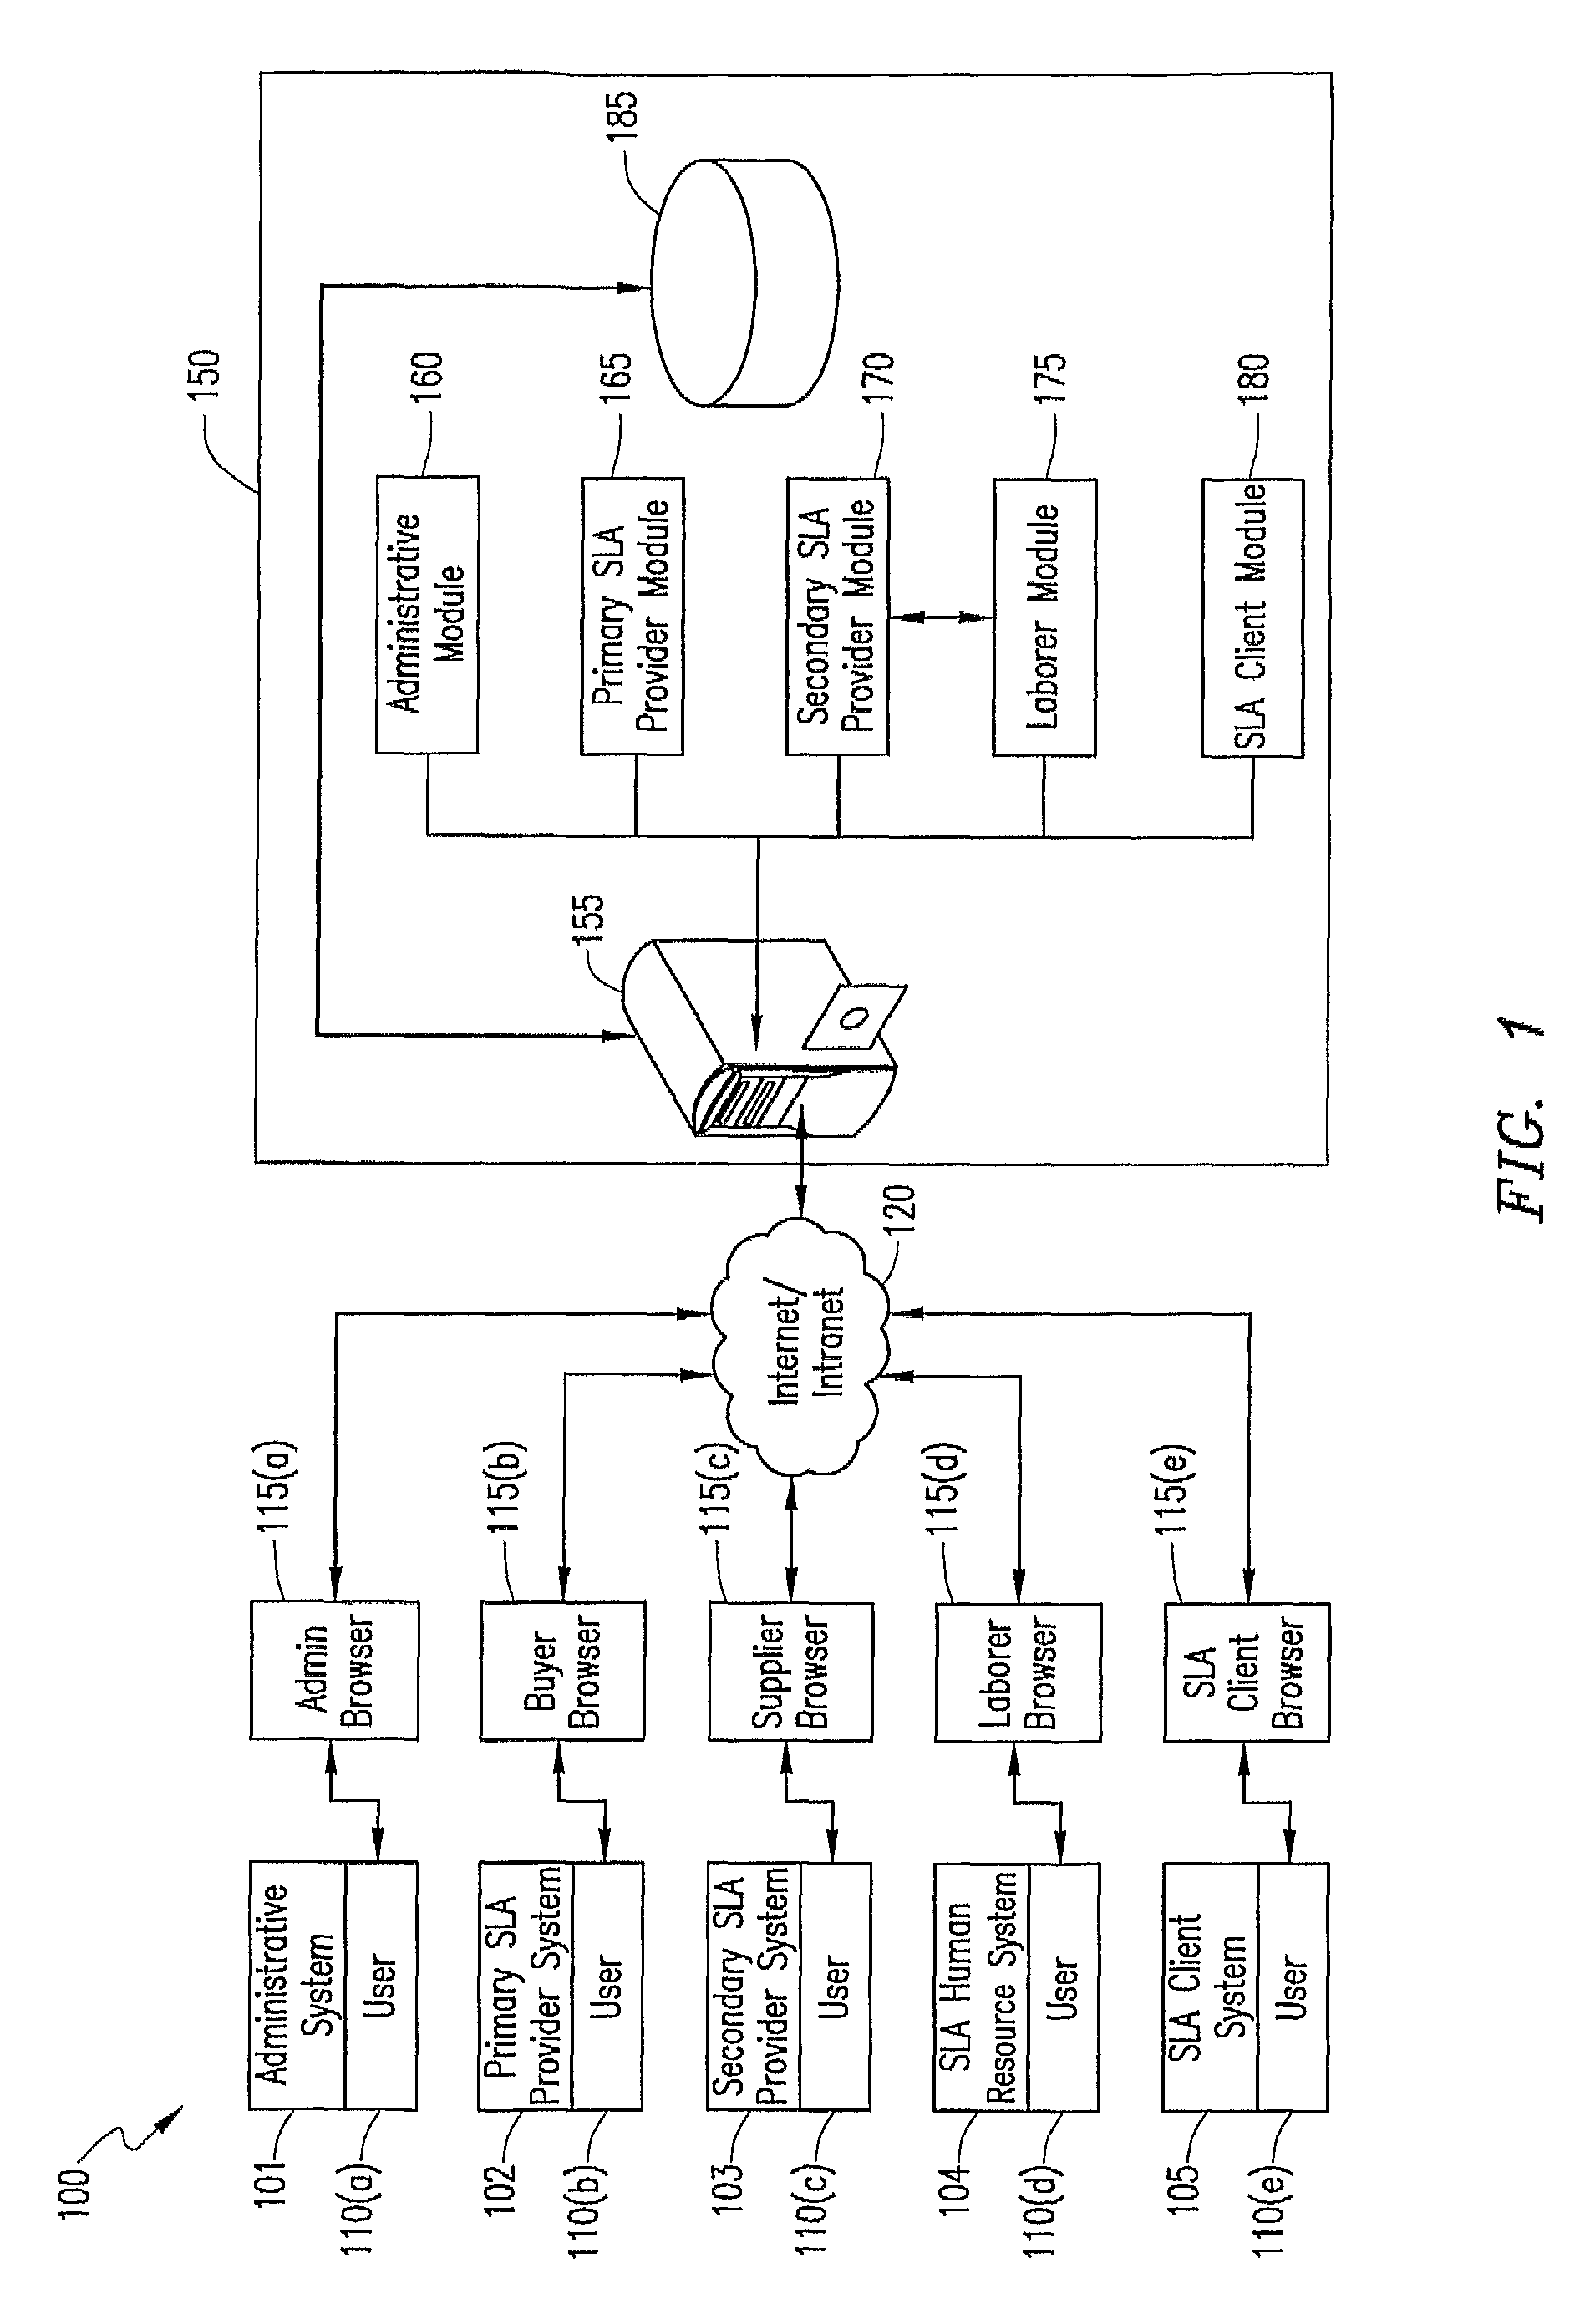 Outsourced service level agreement provisioning management system and method